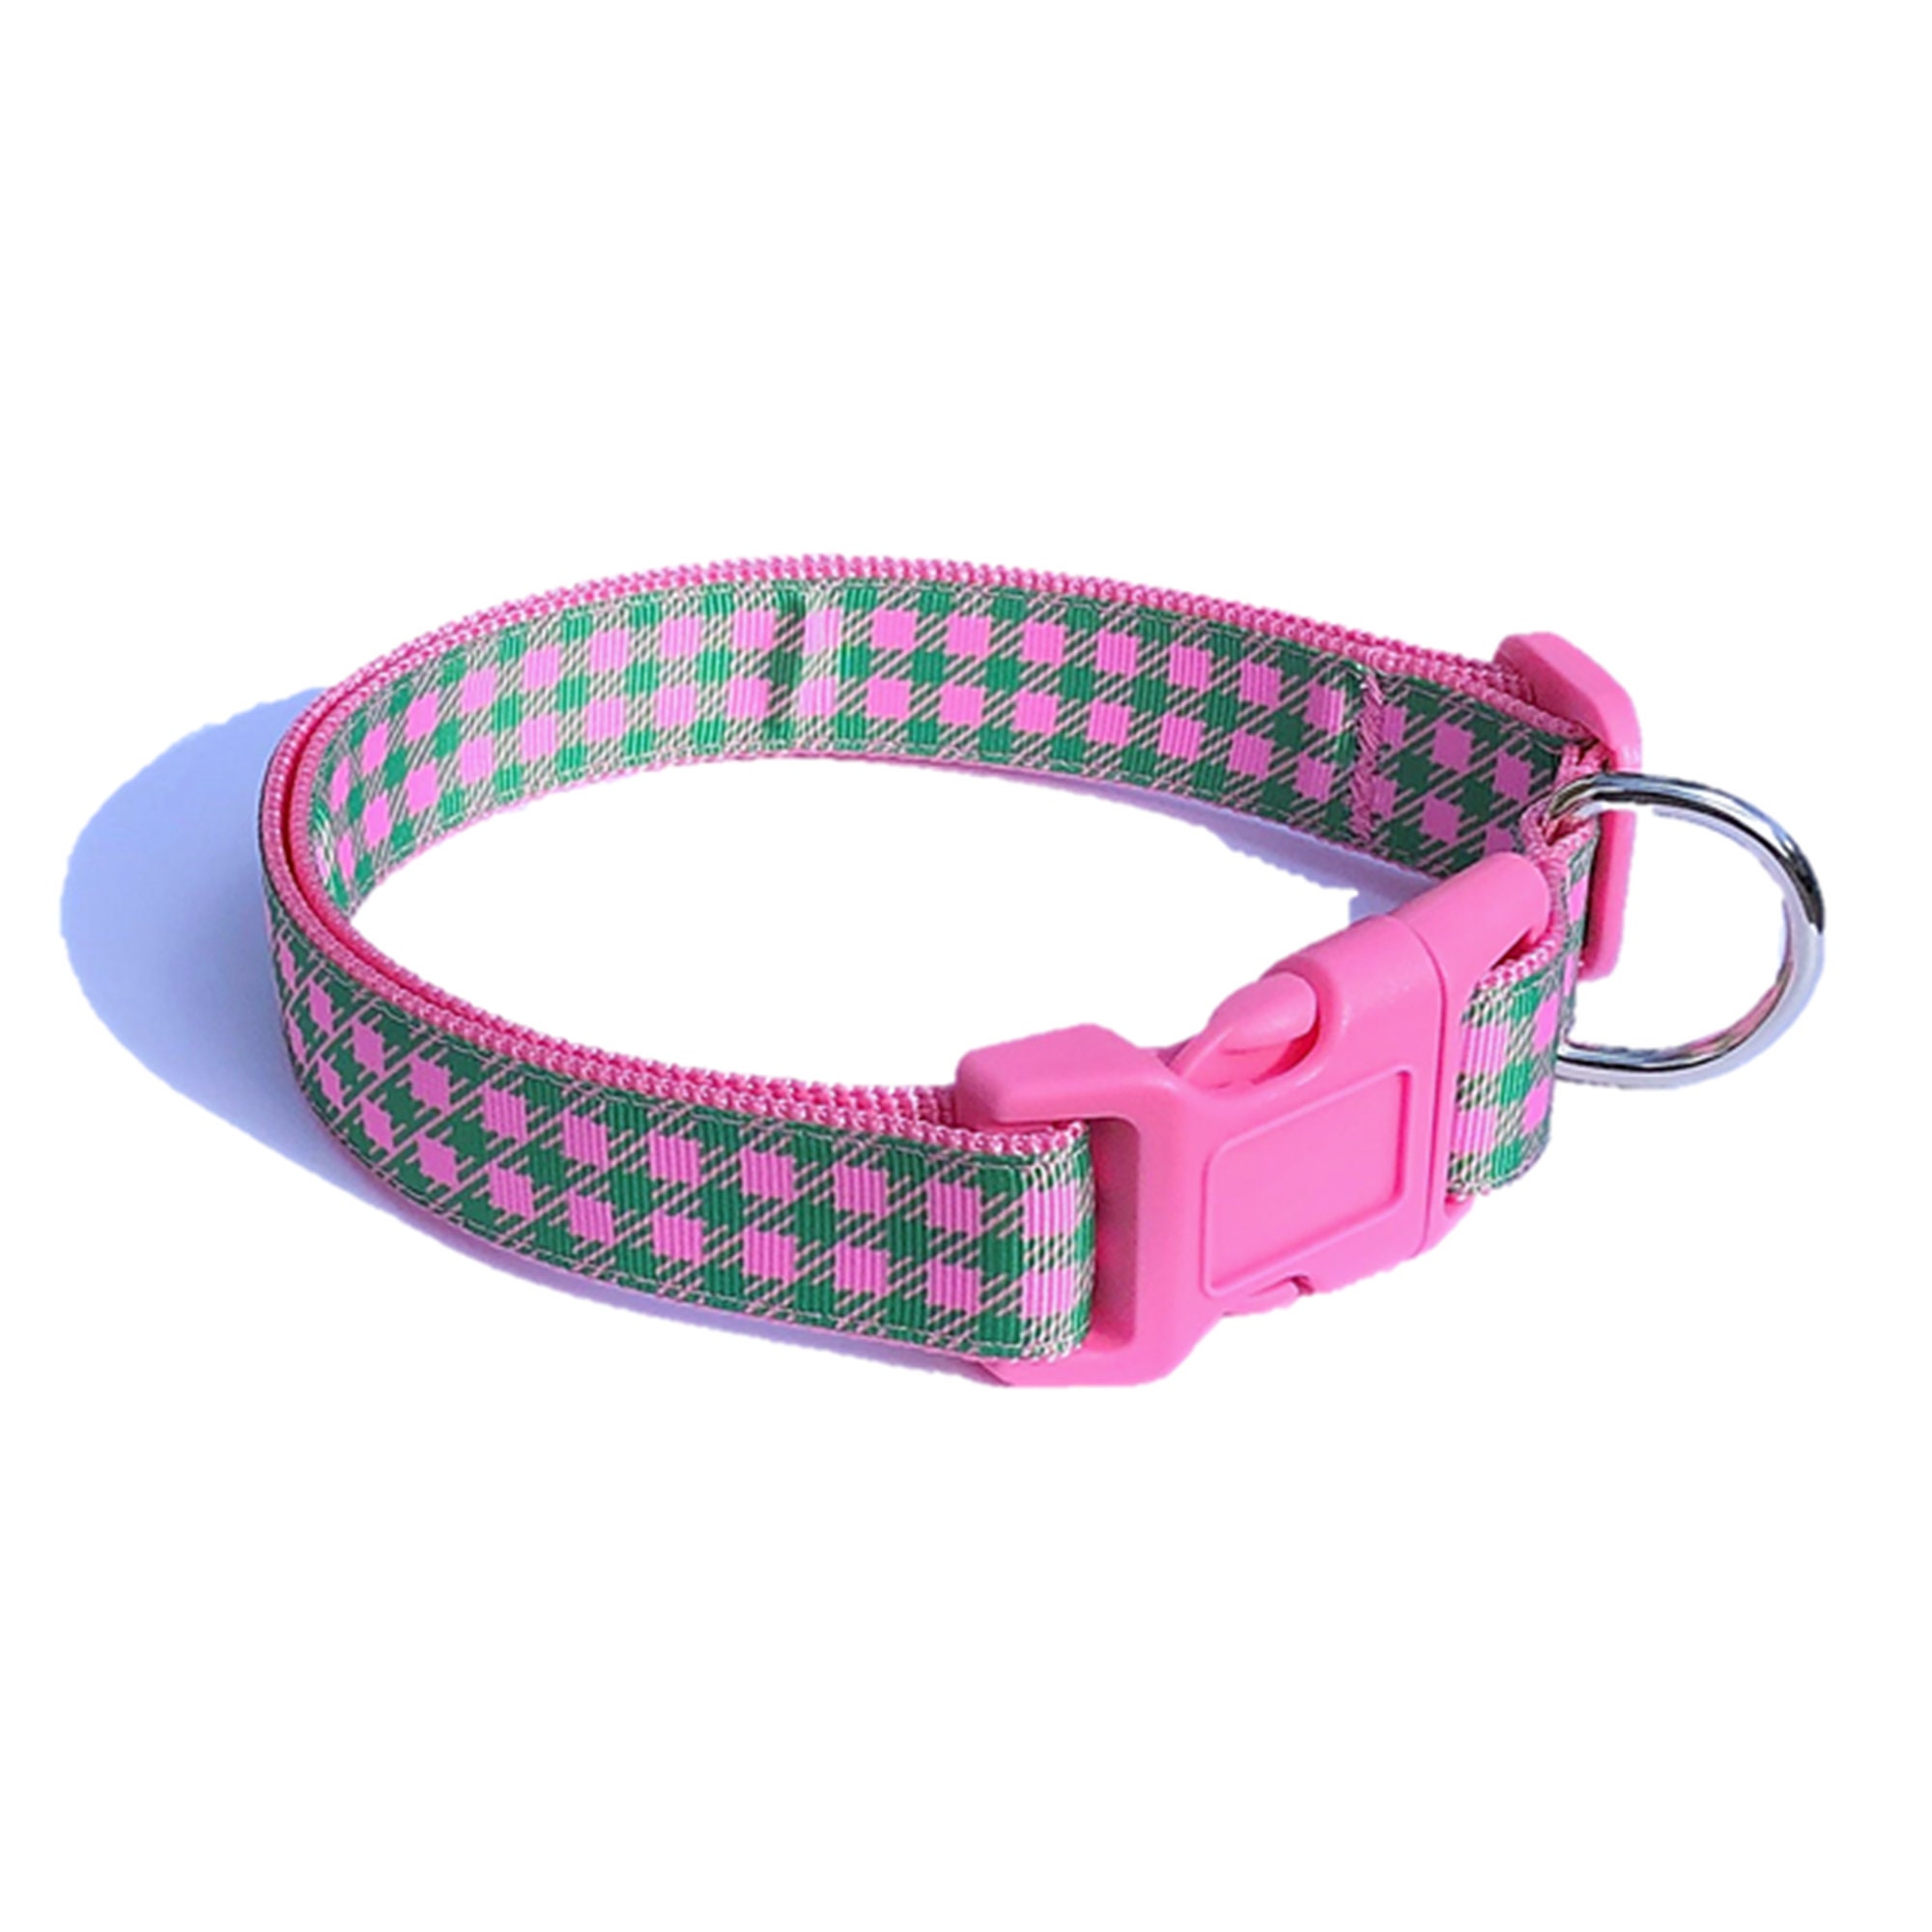  Kate Spade New York Cute Dog Collar, Gold Metal Buckle Dog  Collar, 11.5 to 15 Adjustable Dog Collar for Female or Male Dogs, Stylish  Dog Collar for Small and Medium